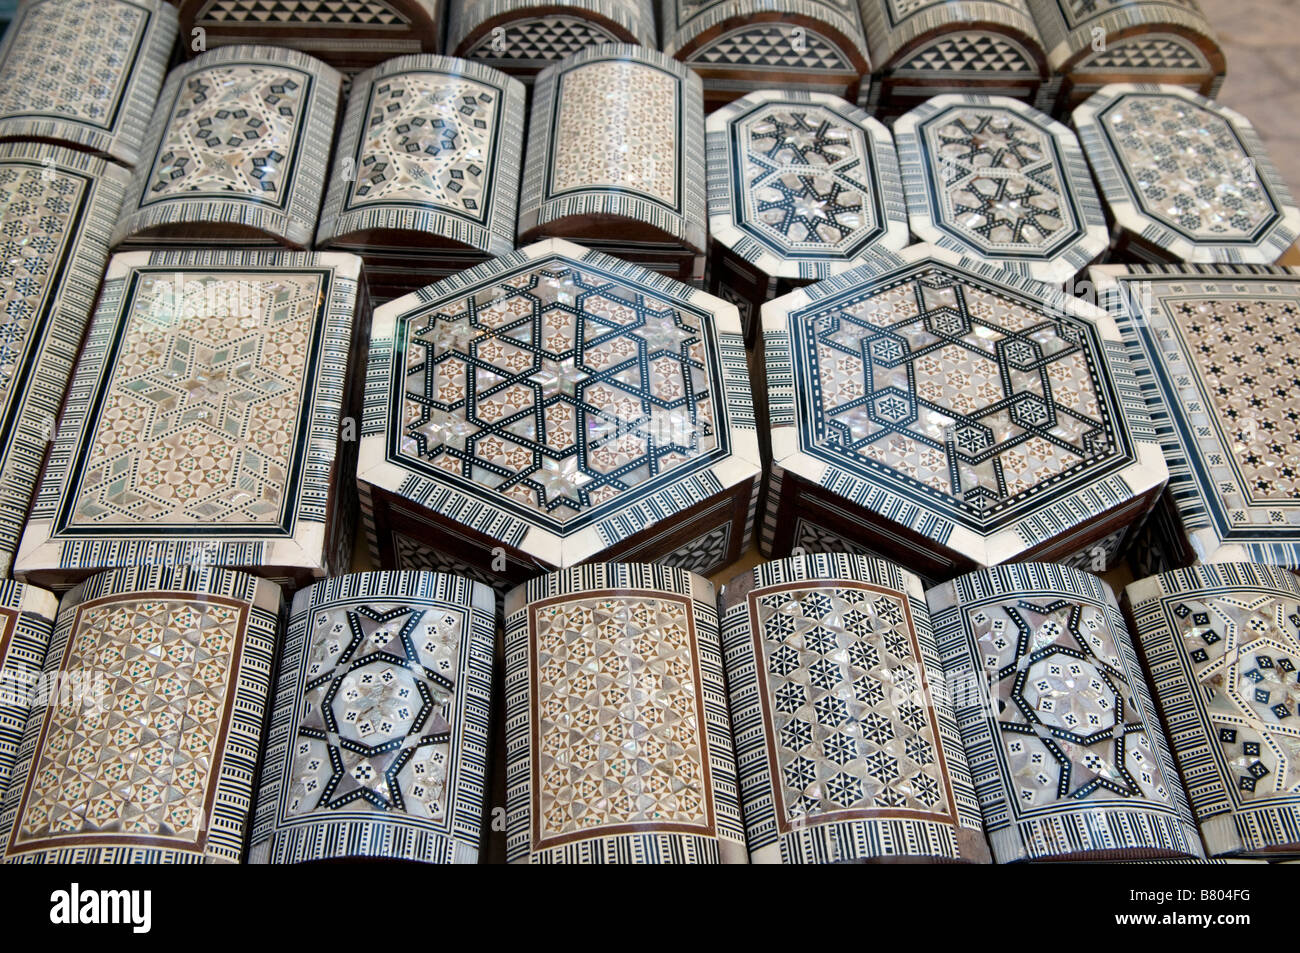 Handcrafted Mother of Pearl Inlaid Jewelry wooden boxes for sale in Khan el-Khalili a major souk in the historic center of Islamic Cairo Egypt Stock Photo